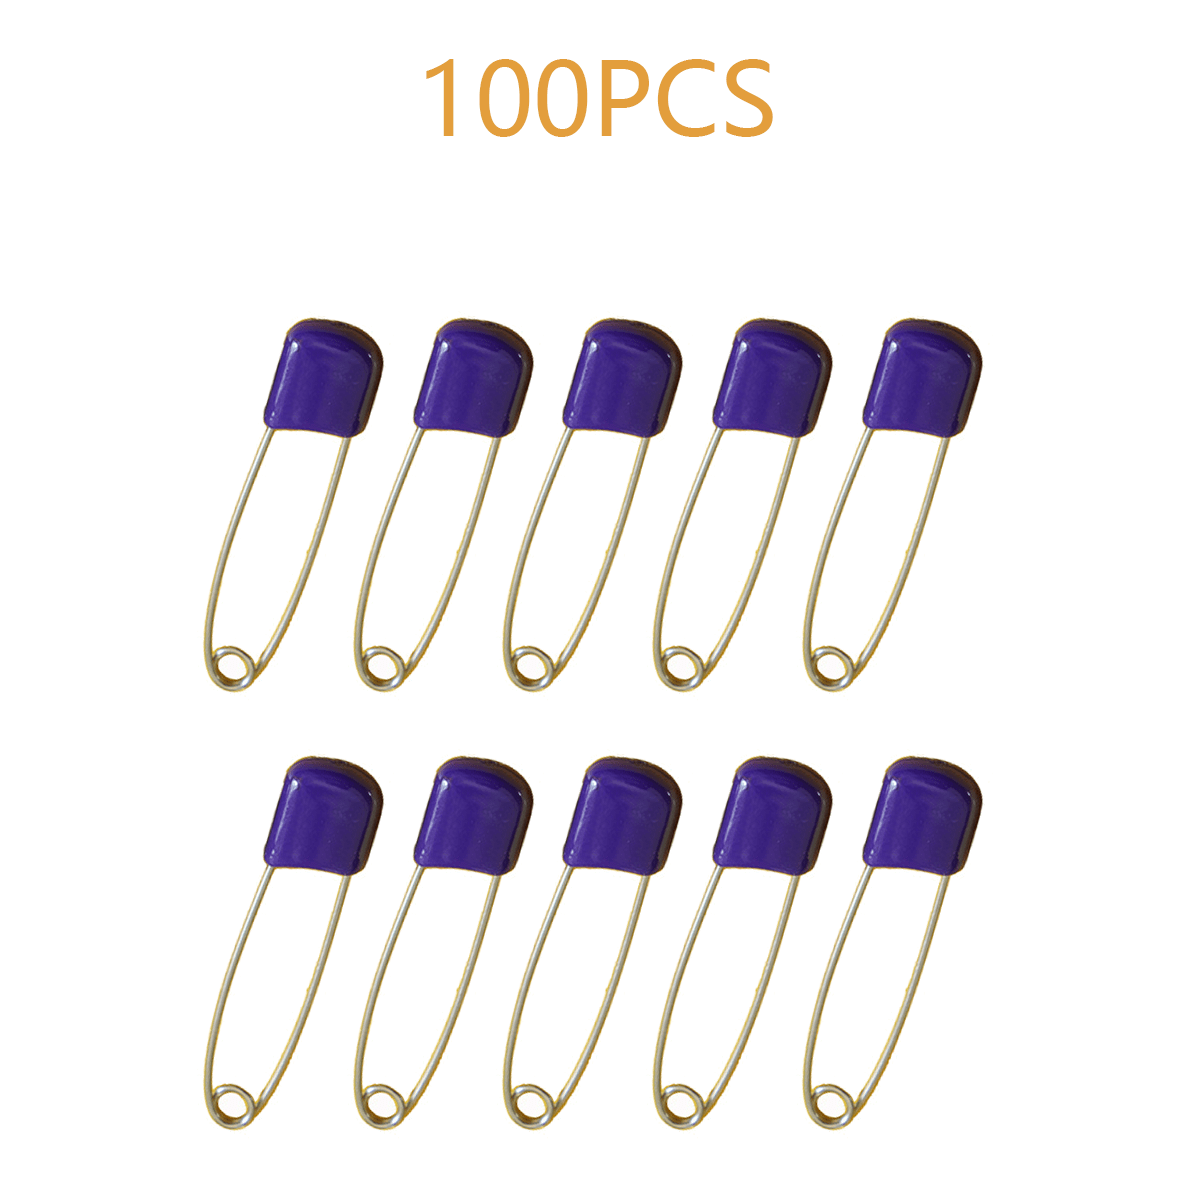 Plastic Head Safety Pins 2 Inch Long 50 Pcs Diaper Nappy Locking